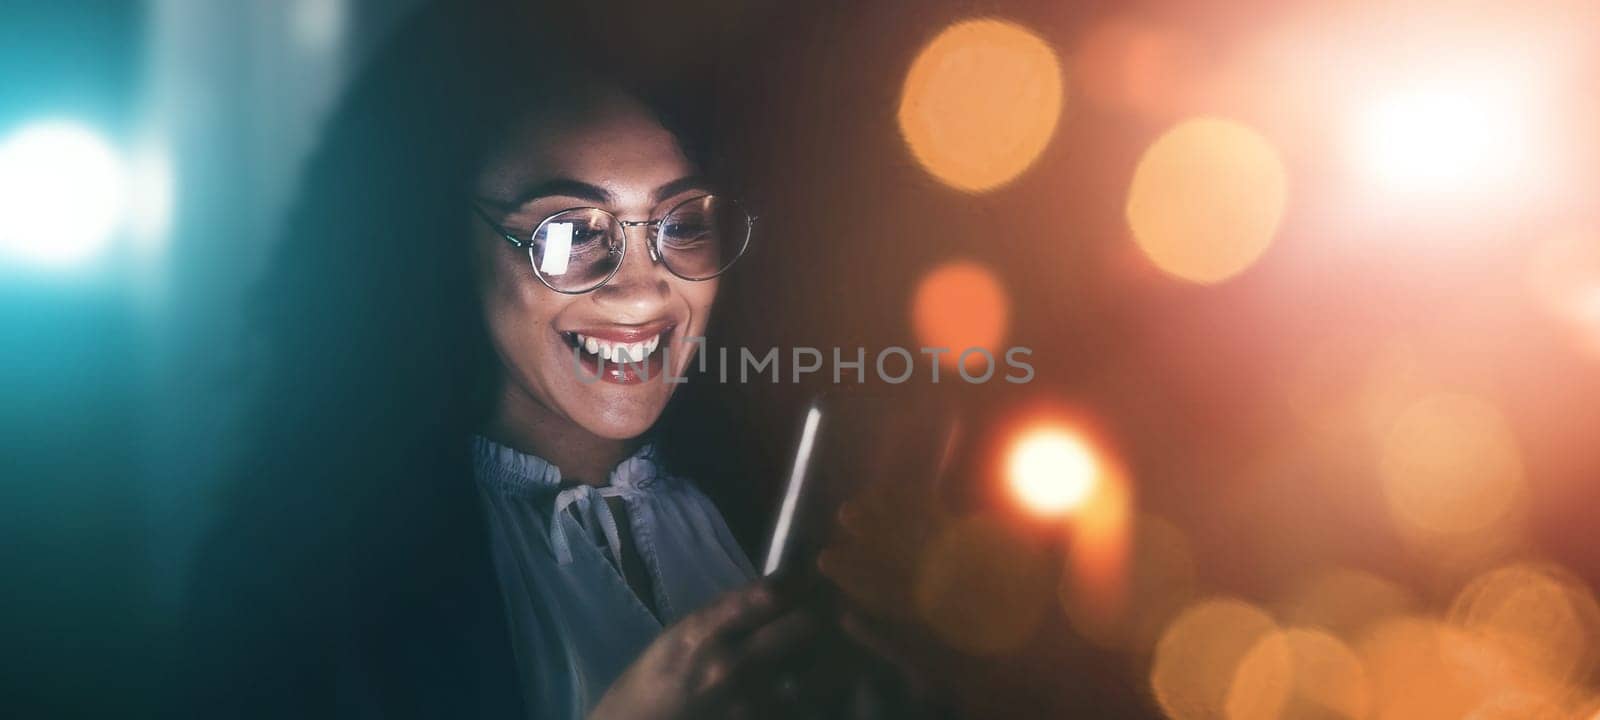 Businesswoman, phone and smile in communication at night for texting, chatting or networking on dark background. Happy female employee holding smartphone working late for online planning strategy.